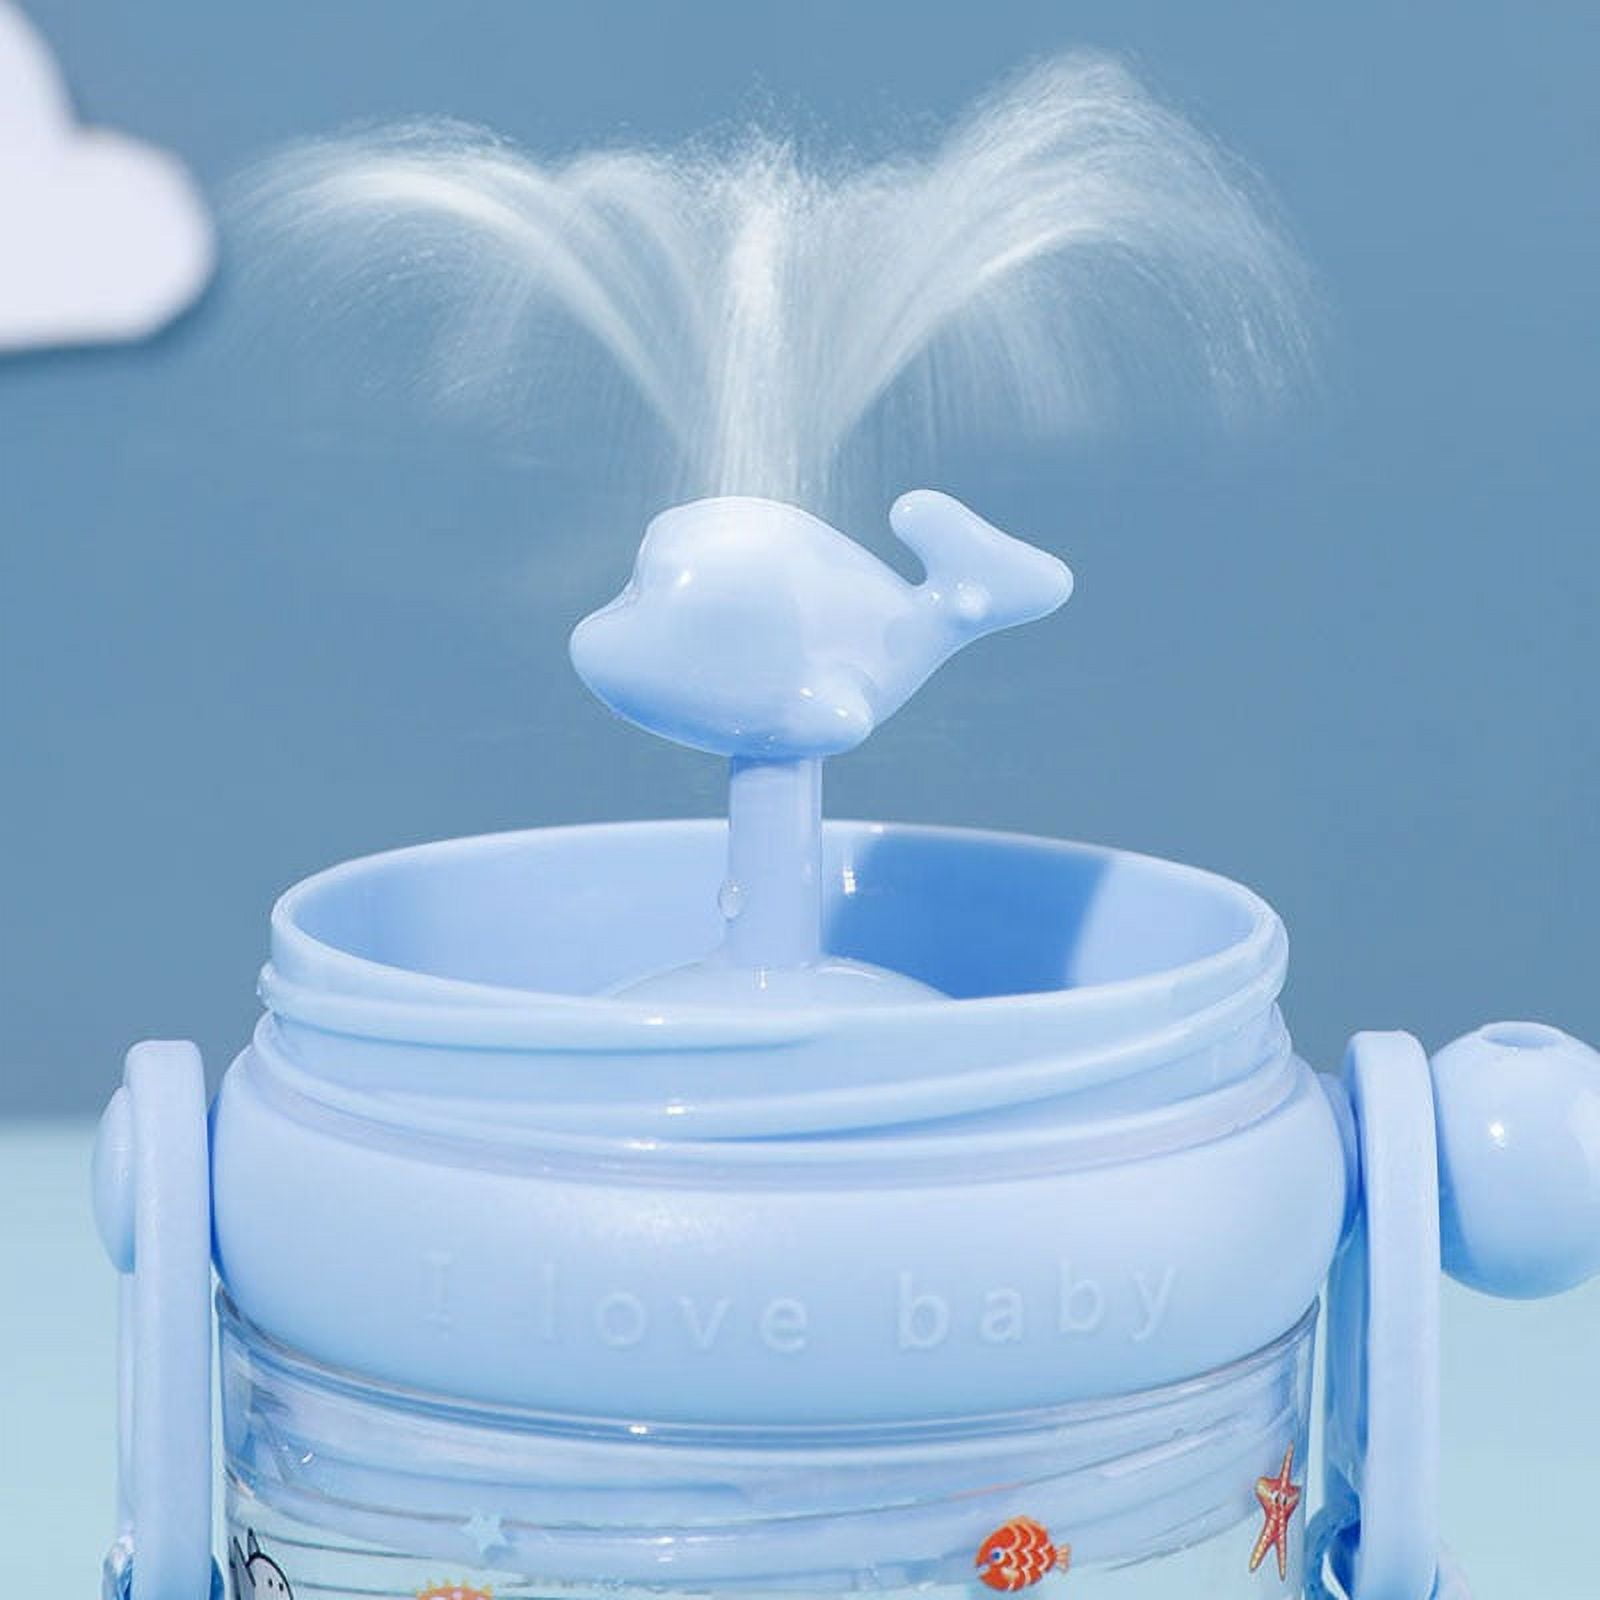 Baby Drinking Cup with Straw Cute Whale Squirt Water Cup 220ML Portable  Diving Water Cup Creative Co…See more Baby Drinking Cup with Straw Cute  Whale